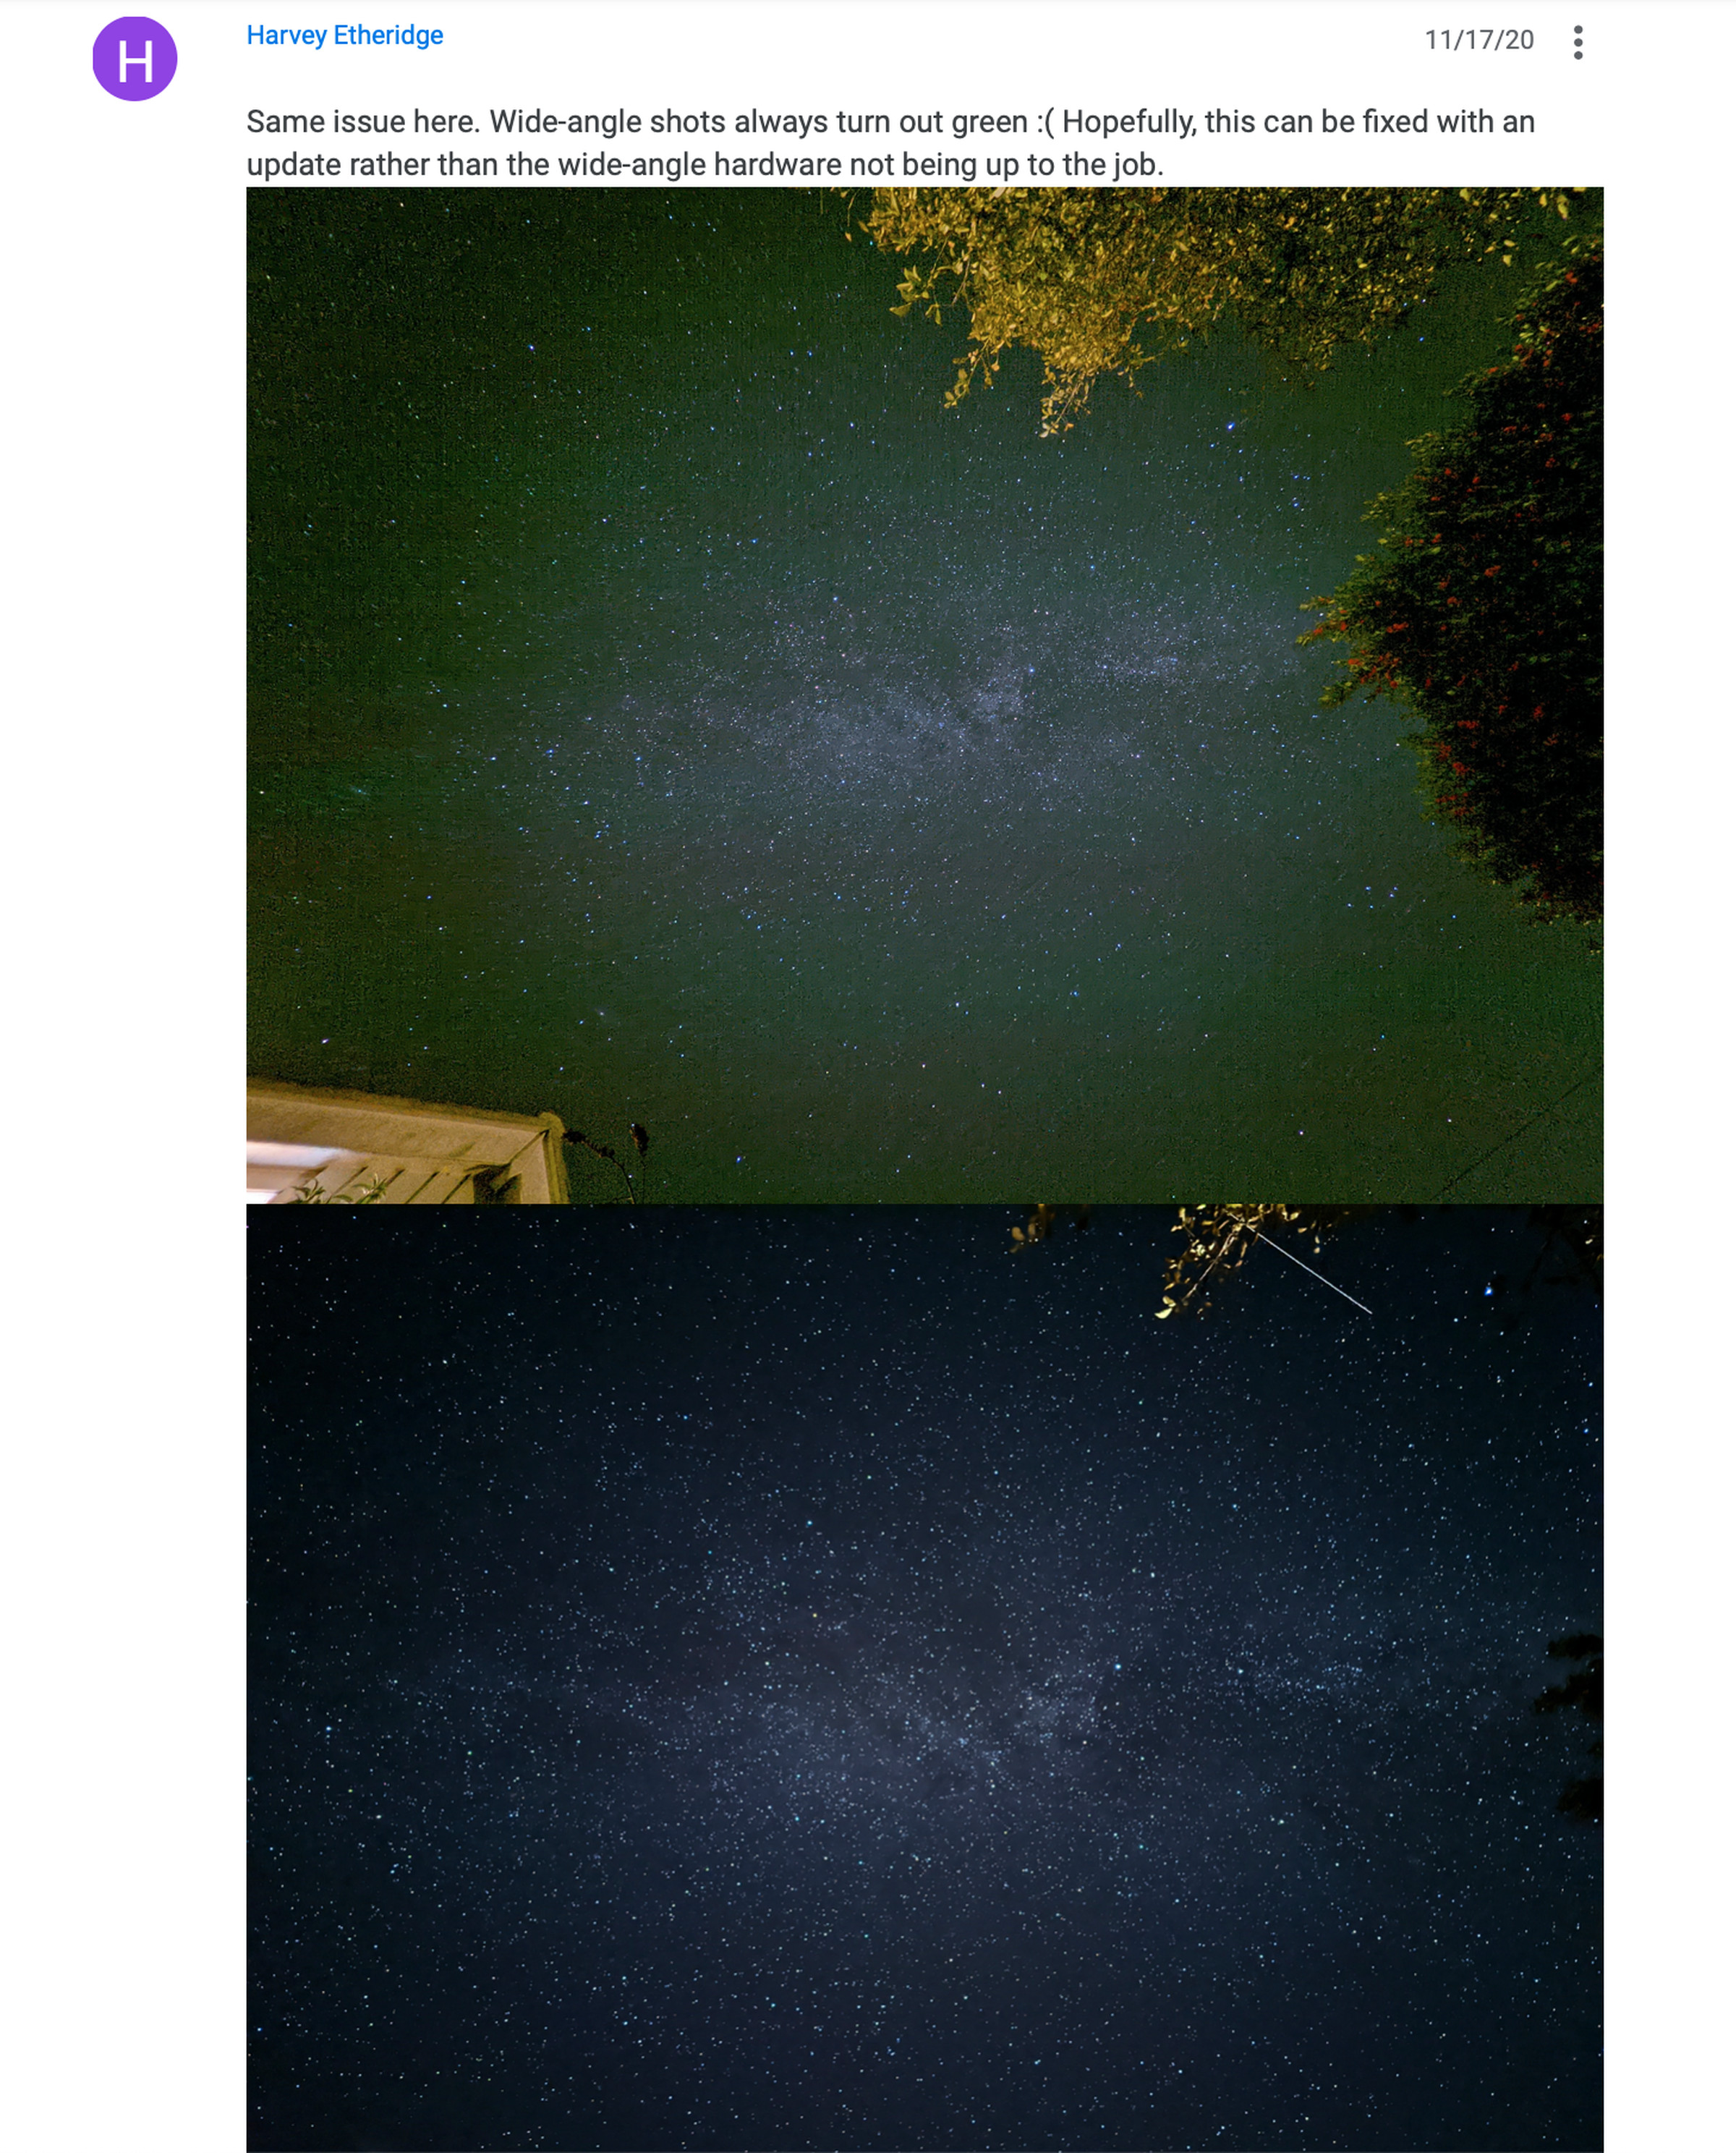 A screenshot of a forum post comparing the two cameras’ results in astrophotography mode.